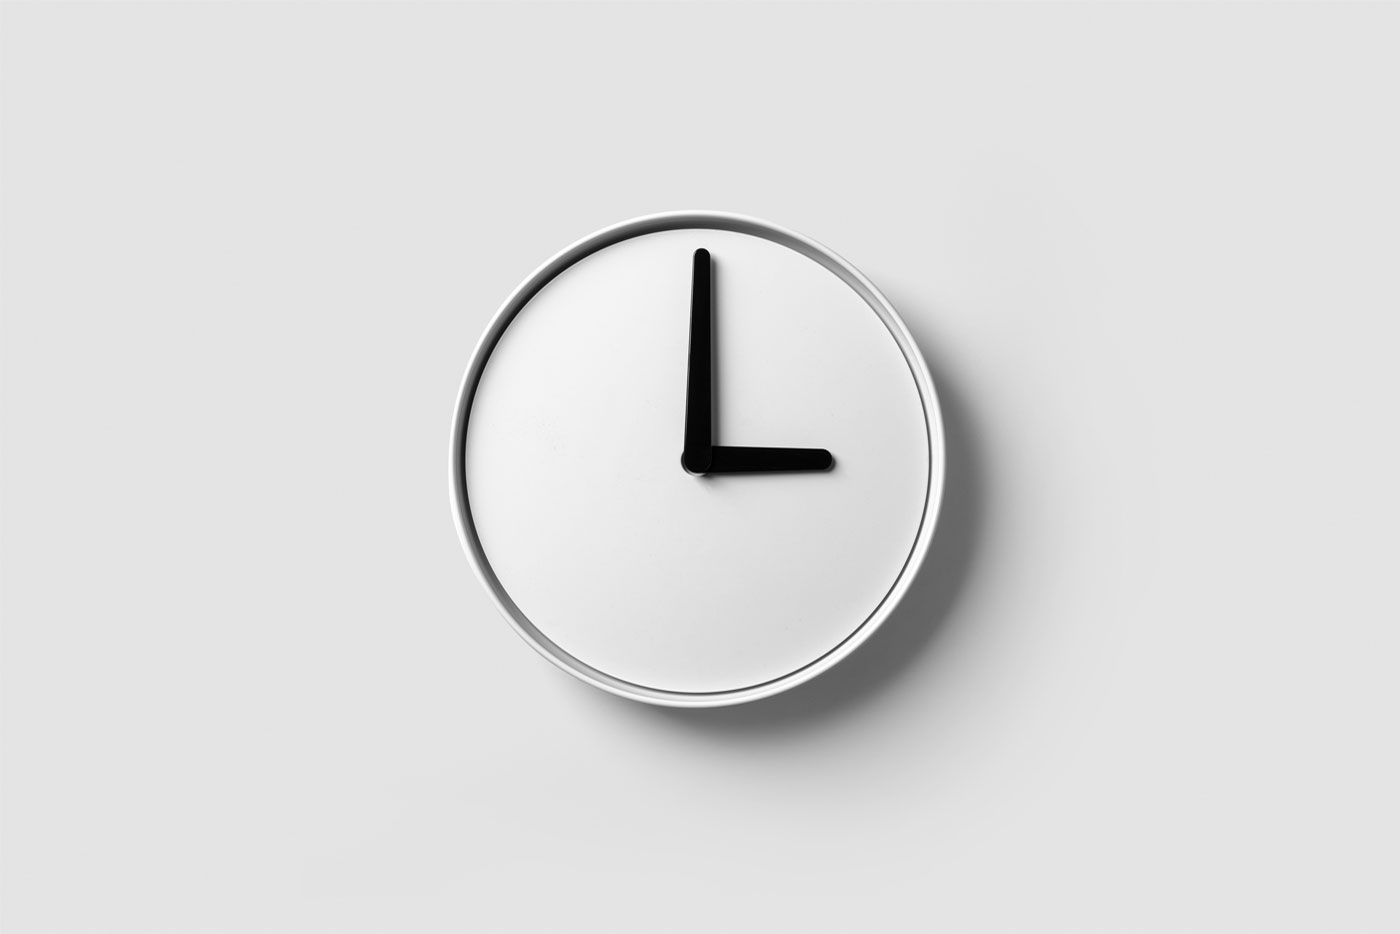 Mockup Featuring Overhead View of Round Clock FREE PSD